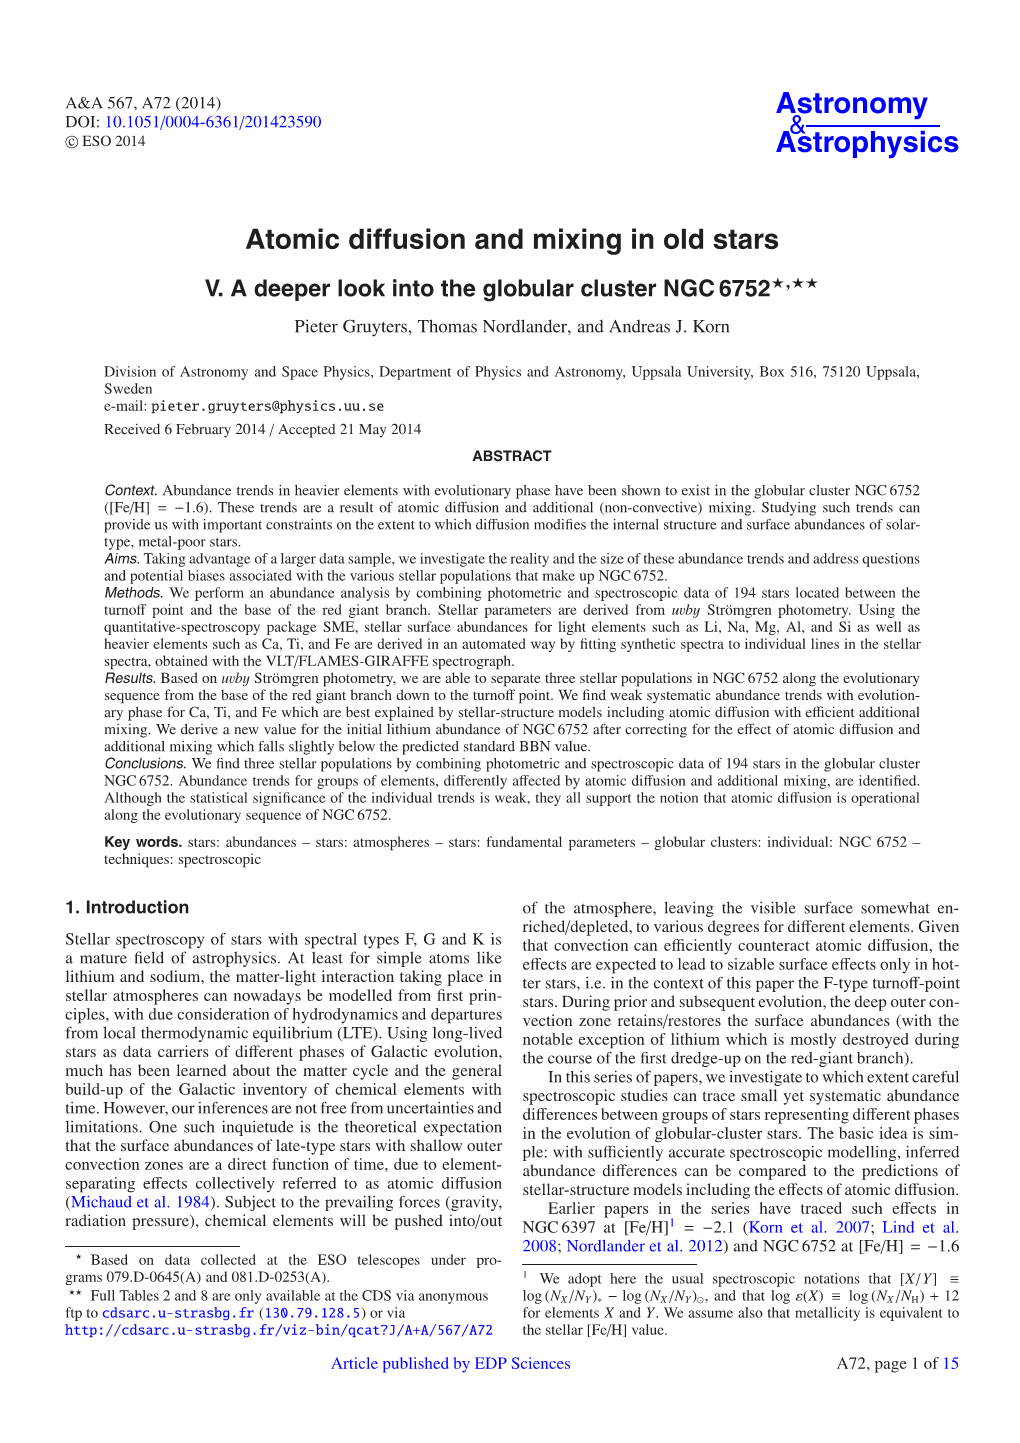 Atomic Diffusion and Mixing in Old Stars V